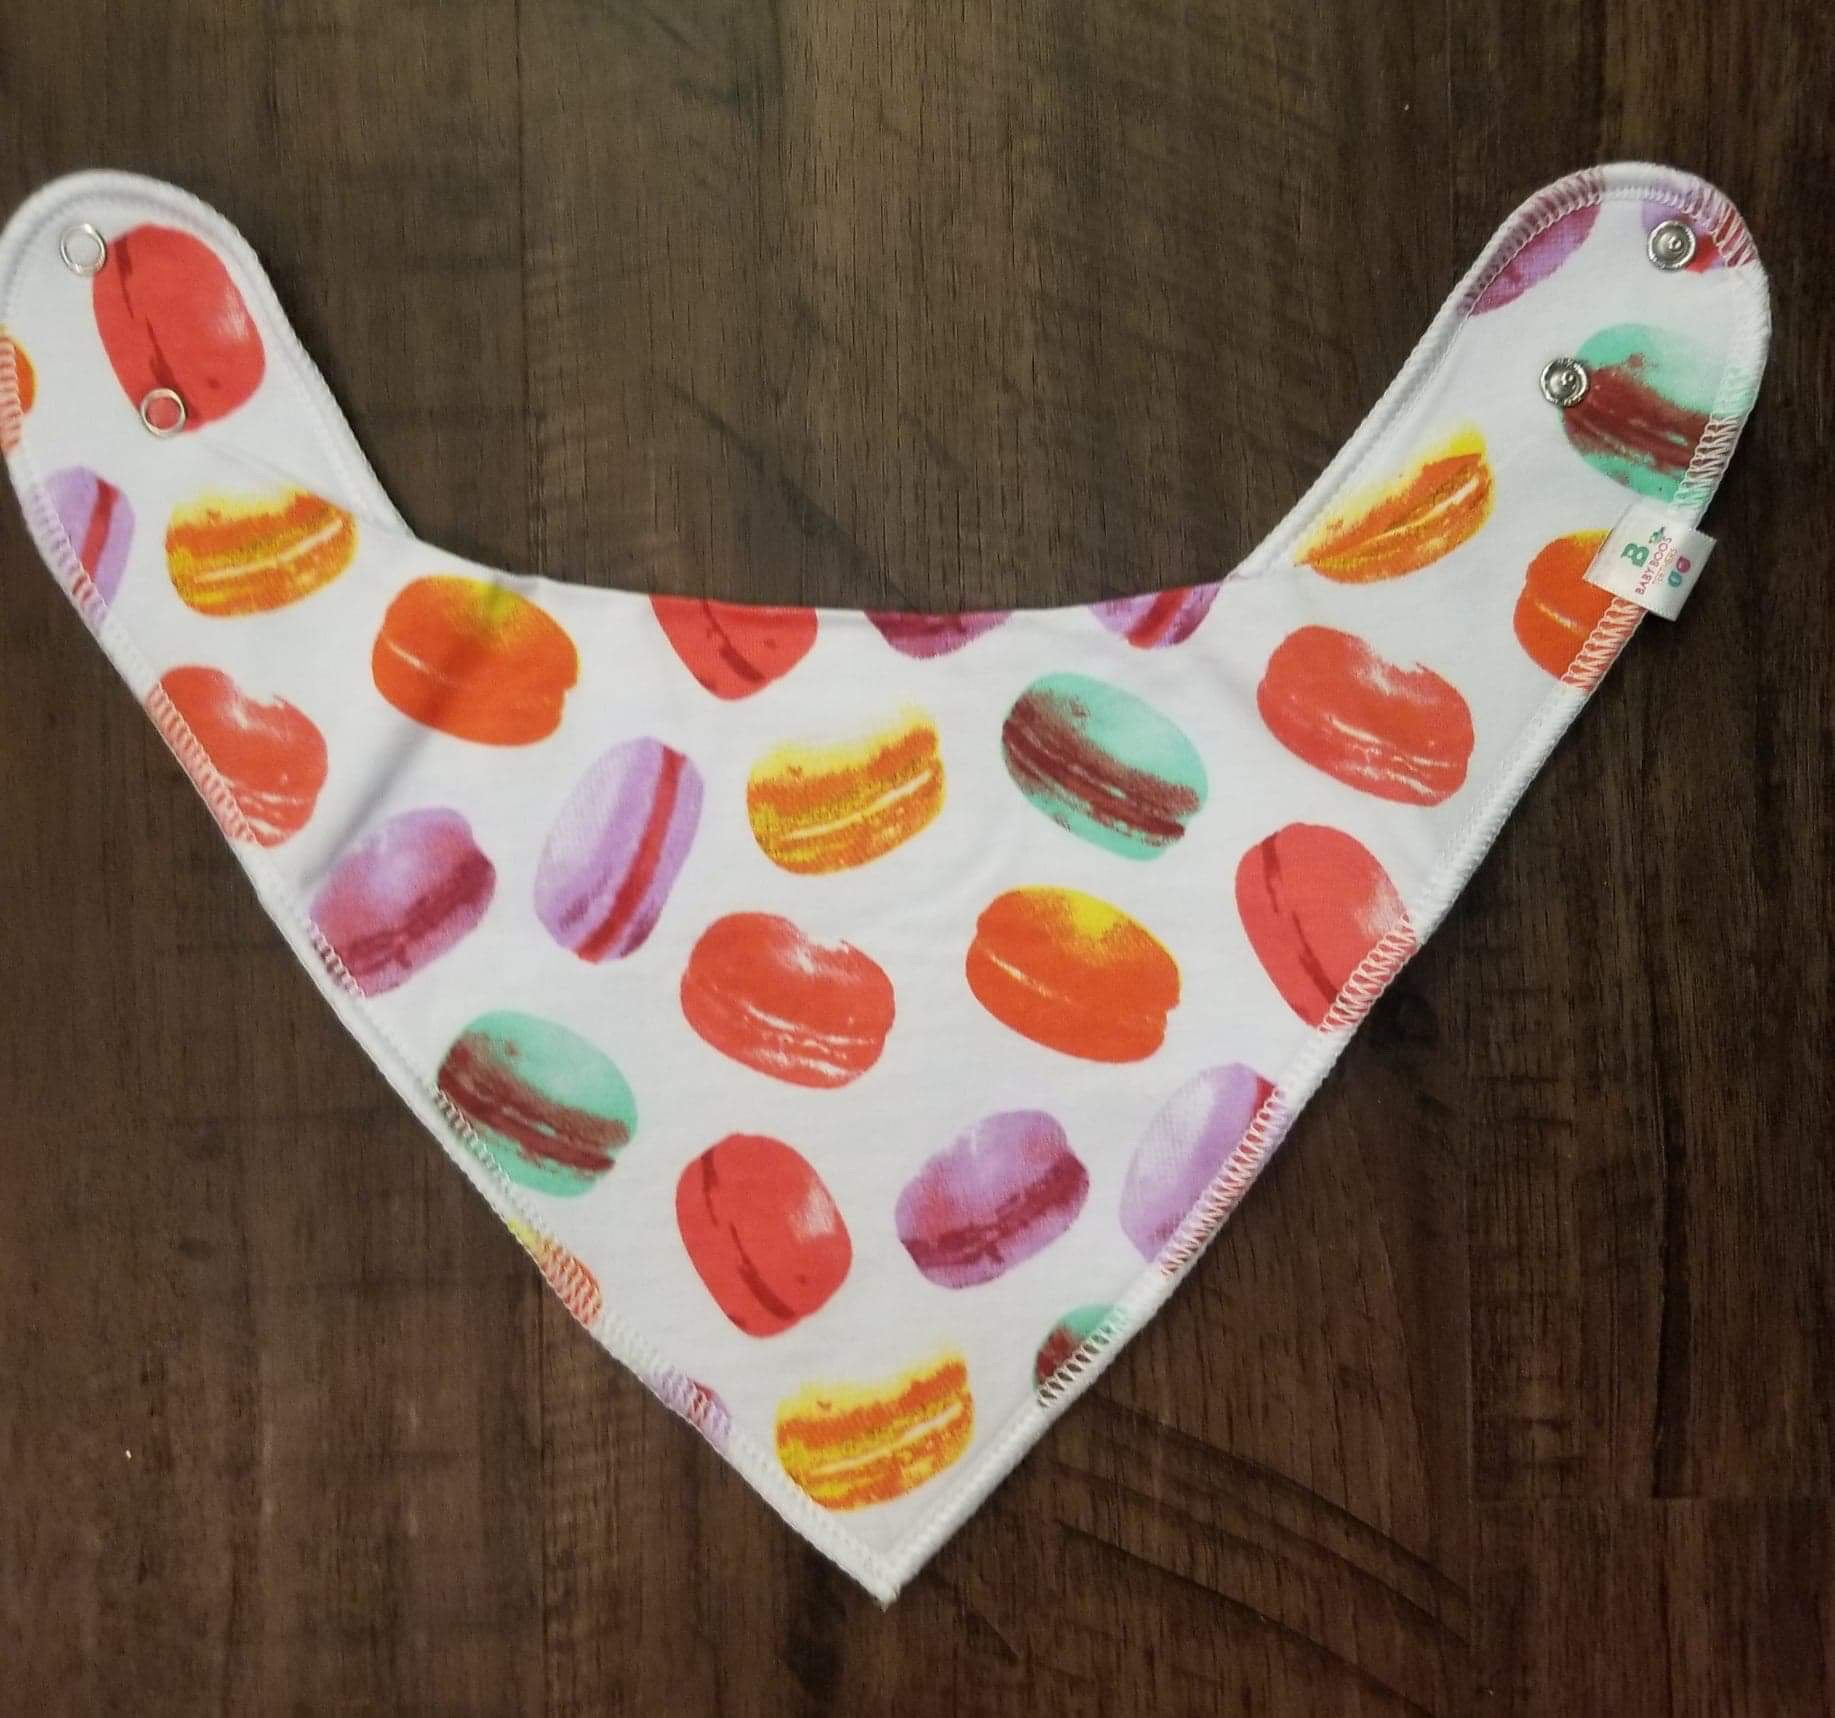 Sweet treats and fun fruity drool bibs (sold separately)  A Touch of Magnolia Boutique   